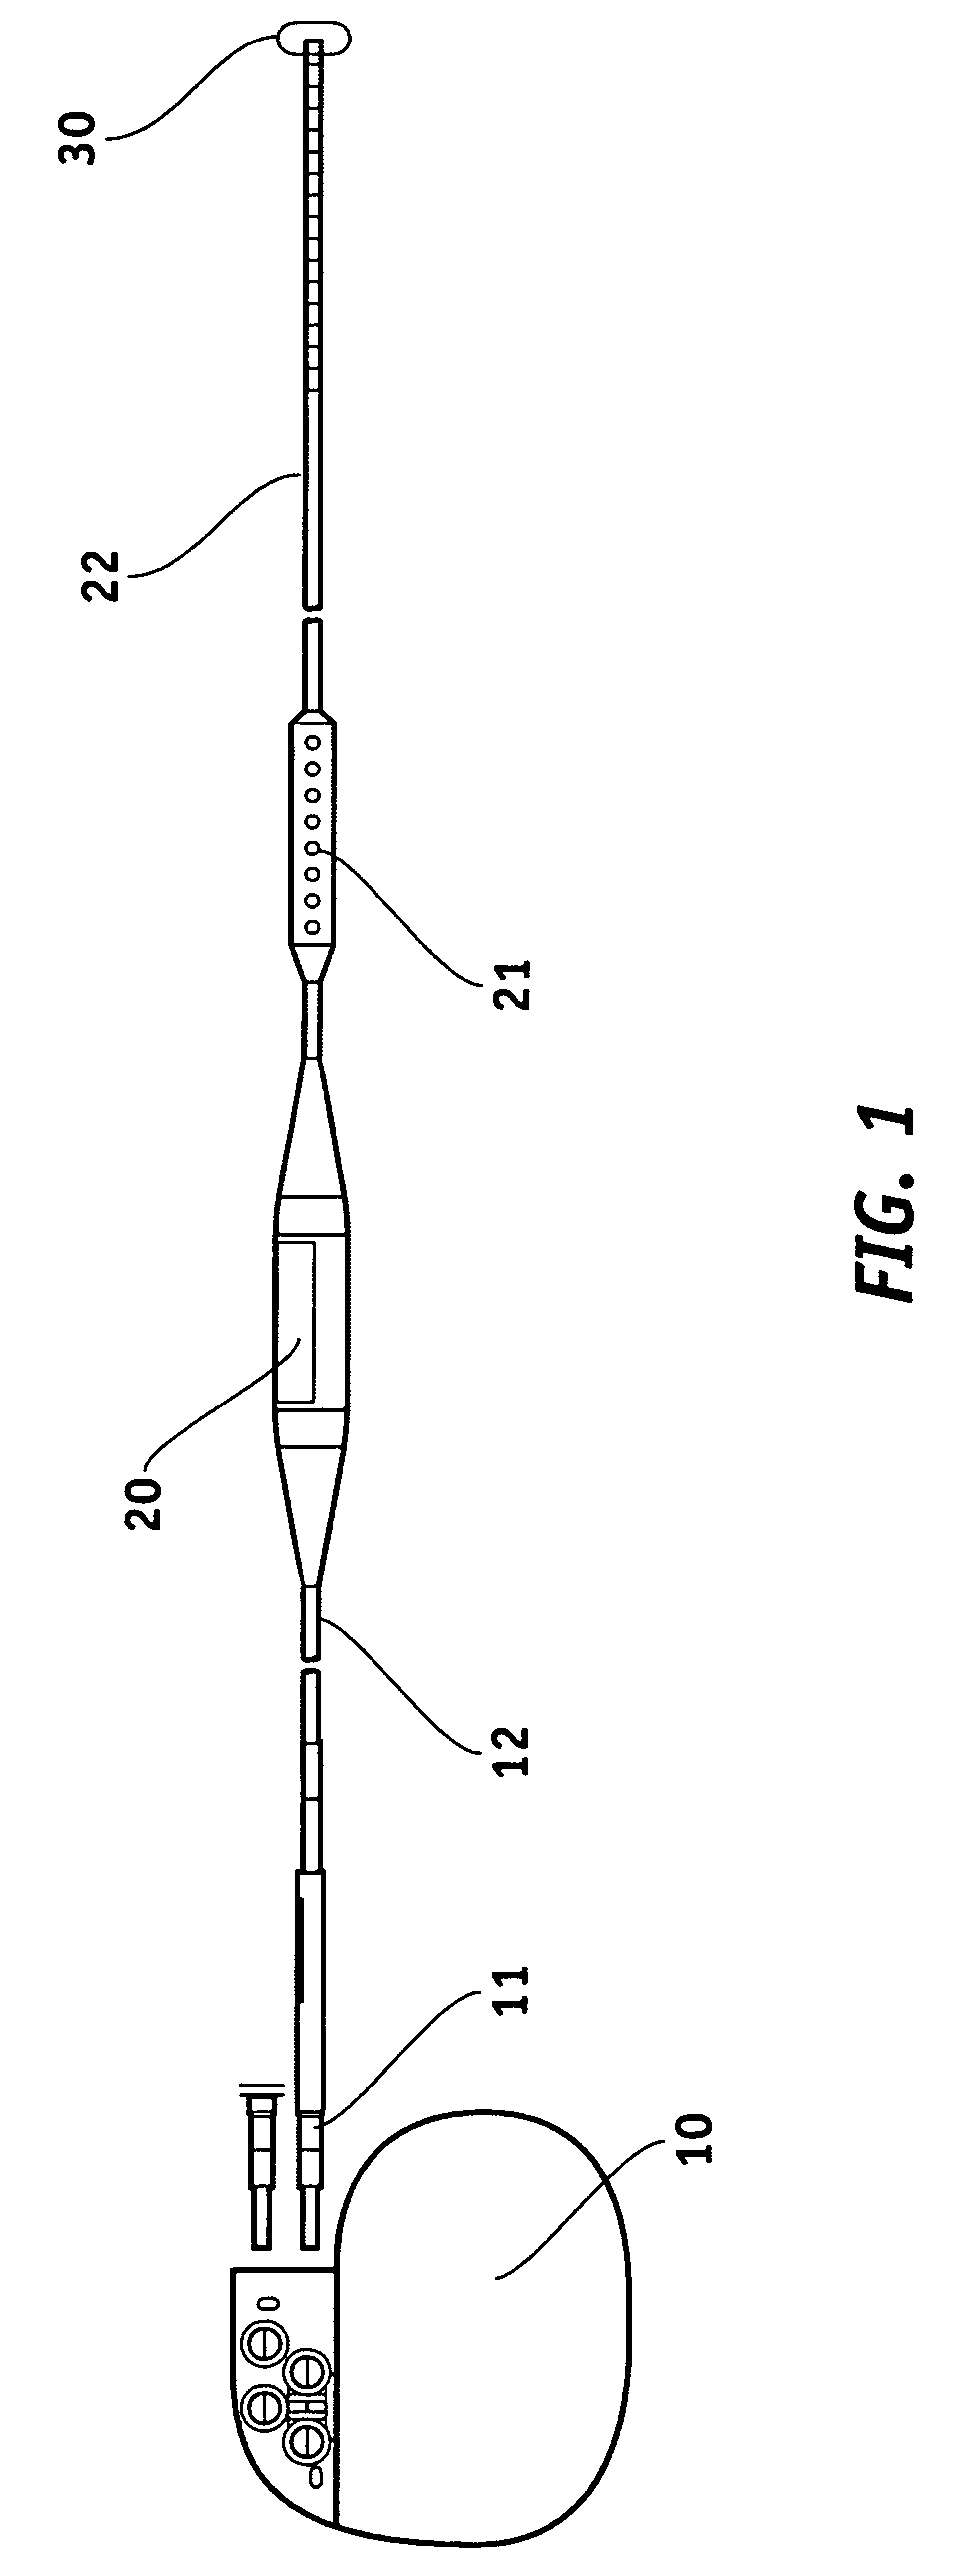 Electrical lead body including an in-line hermetic electronic package and implantable medical device using the same